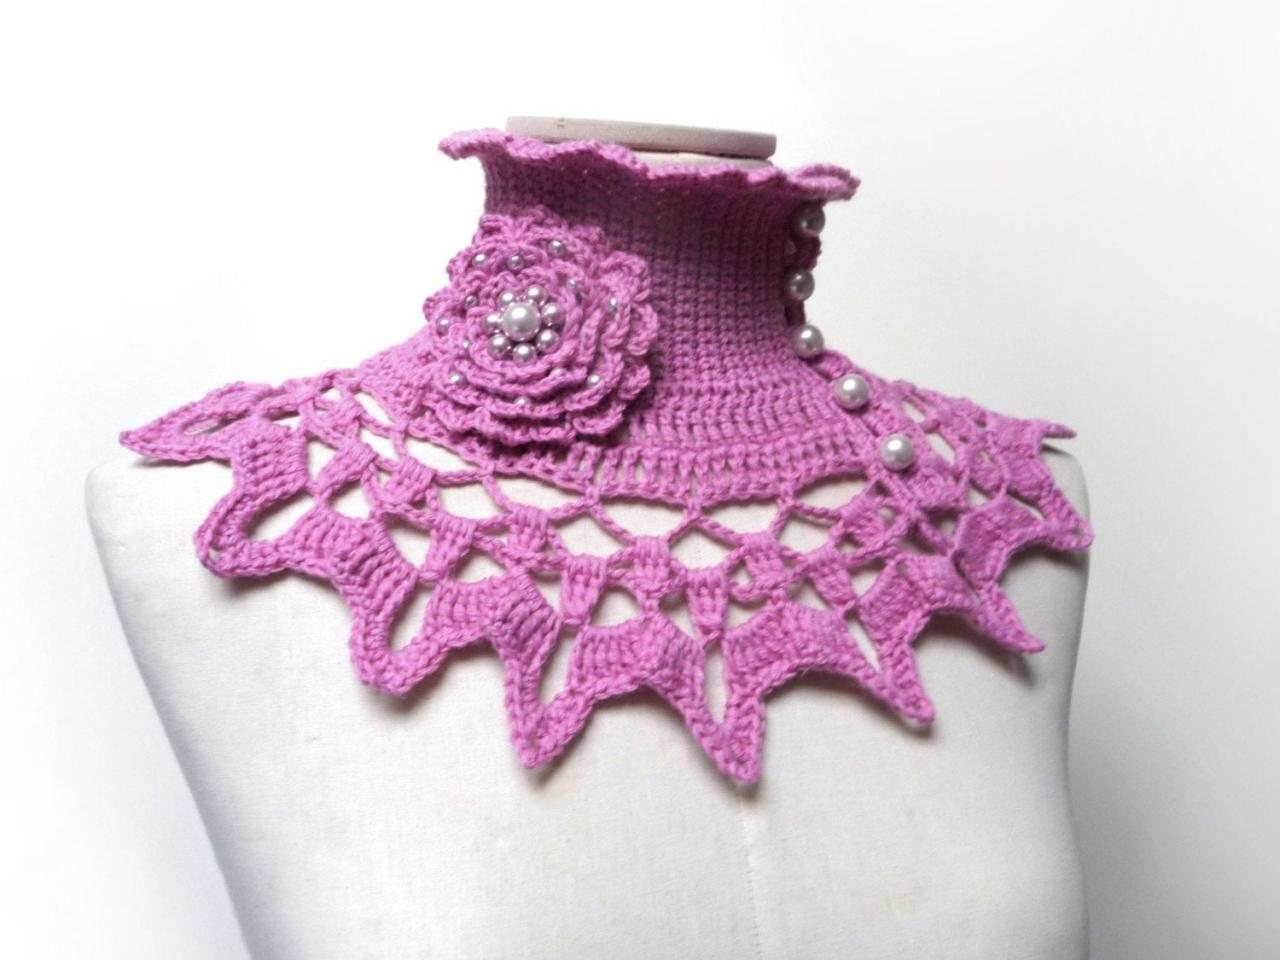 Pink Crochet Collar With Turtleneck, Ruffled And Lace Neck Piece, Custom Color Wool Neckwarmer, Boho Victorian Style, Mom Friend Gift